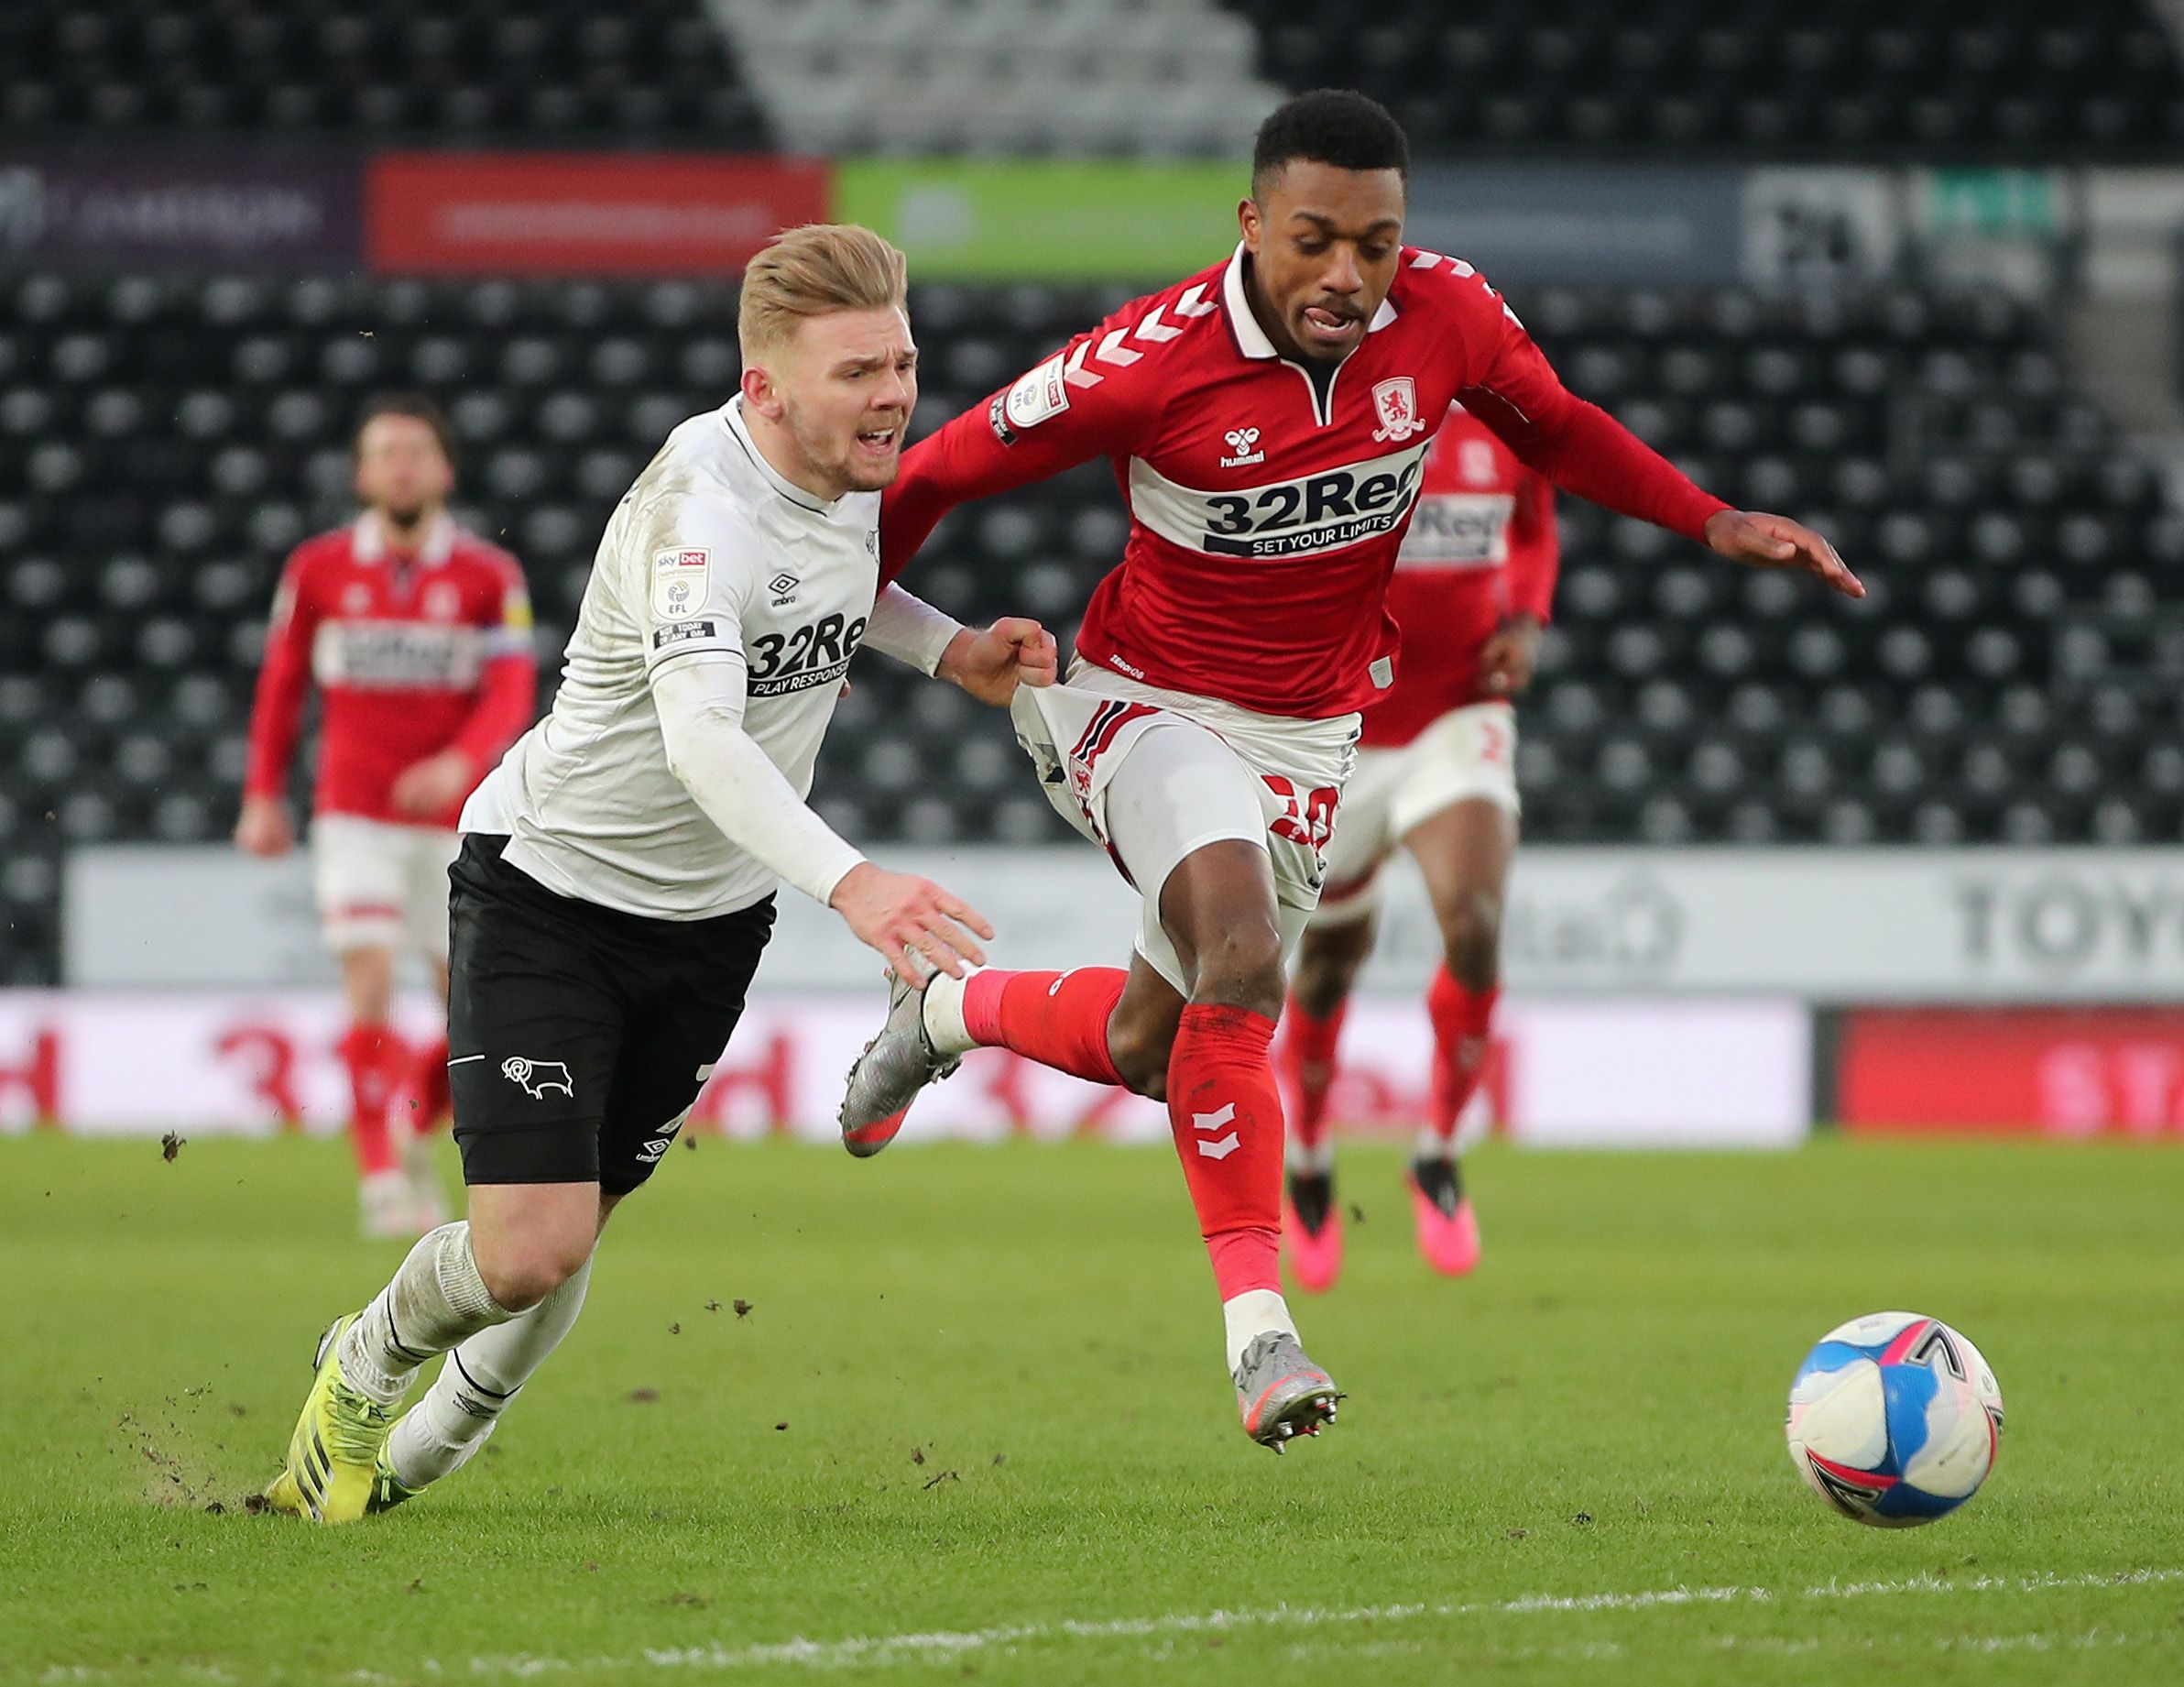 Derby County: Paul Warne rules out Darnell Fisher move -Derby County News